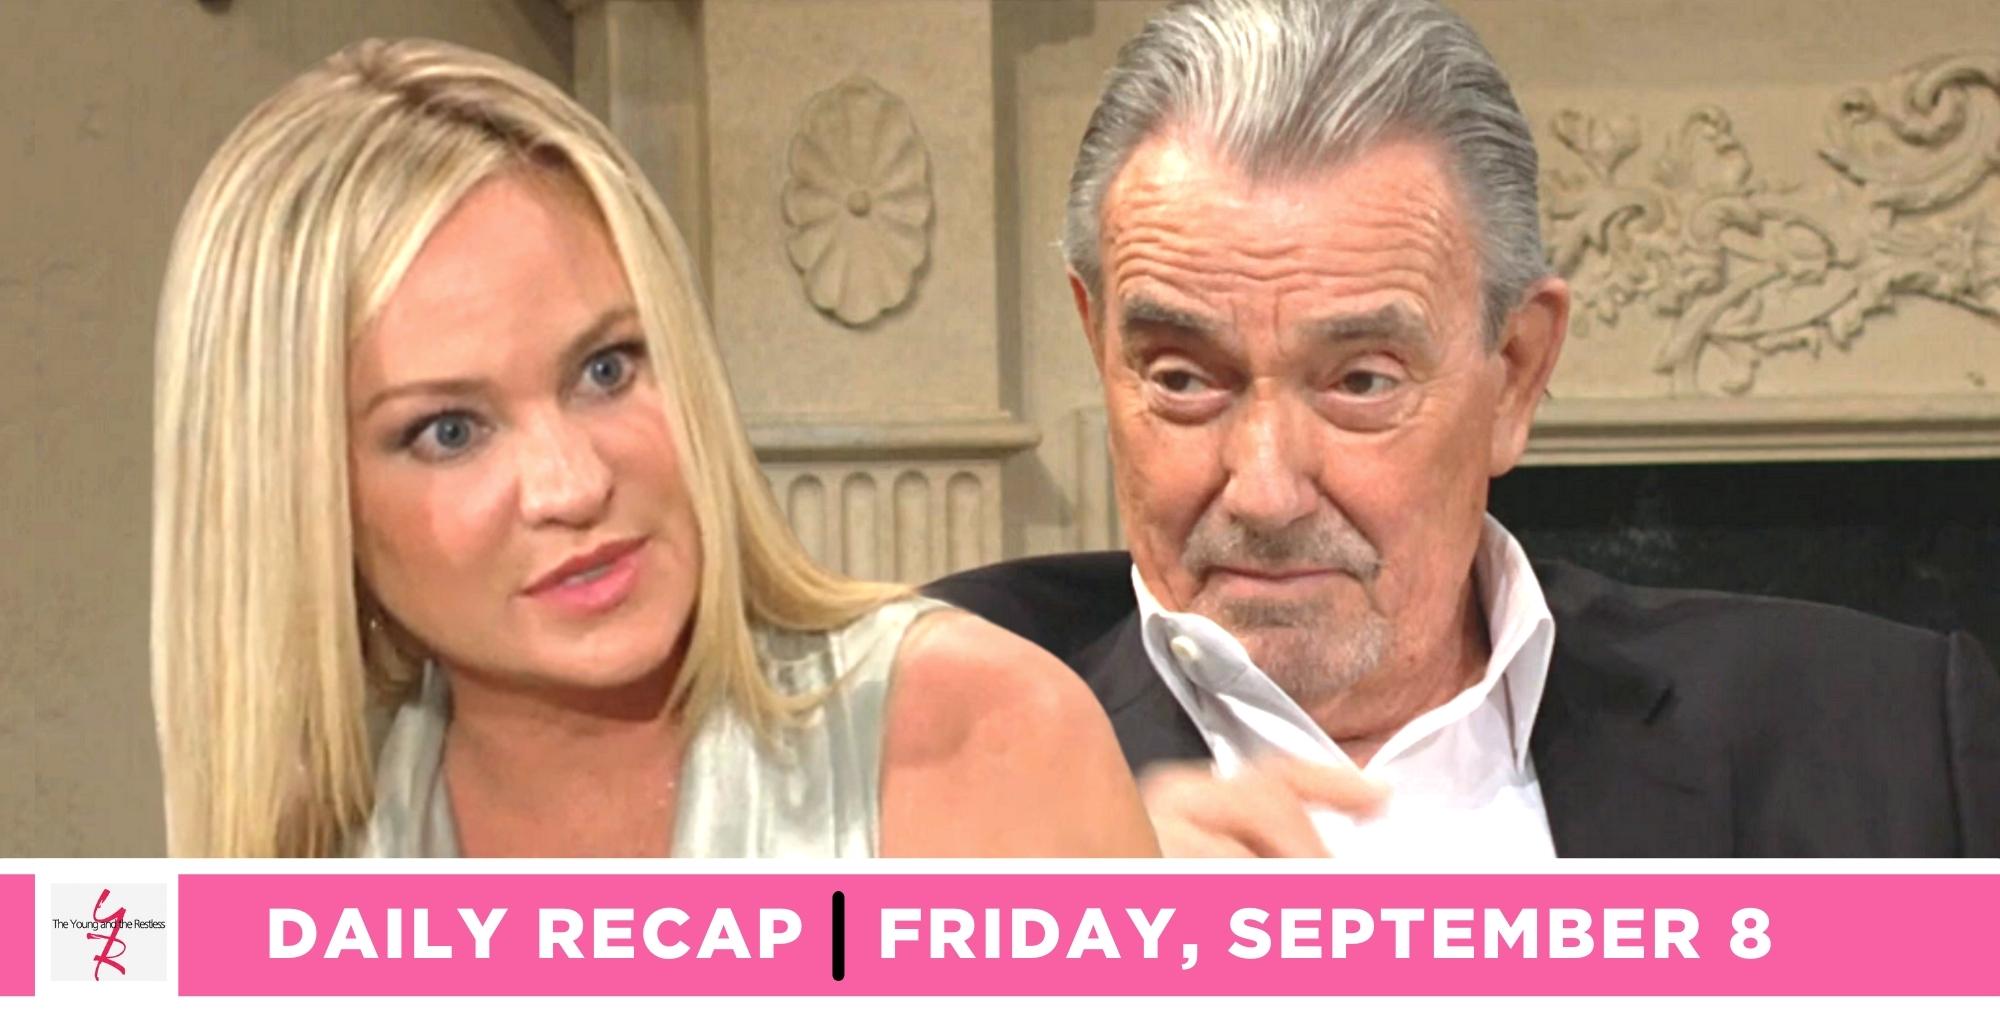 the young and the restless recap for september 8, 2023, has sharon talking with victor.